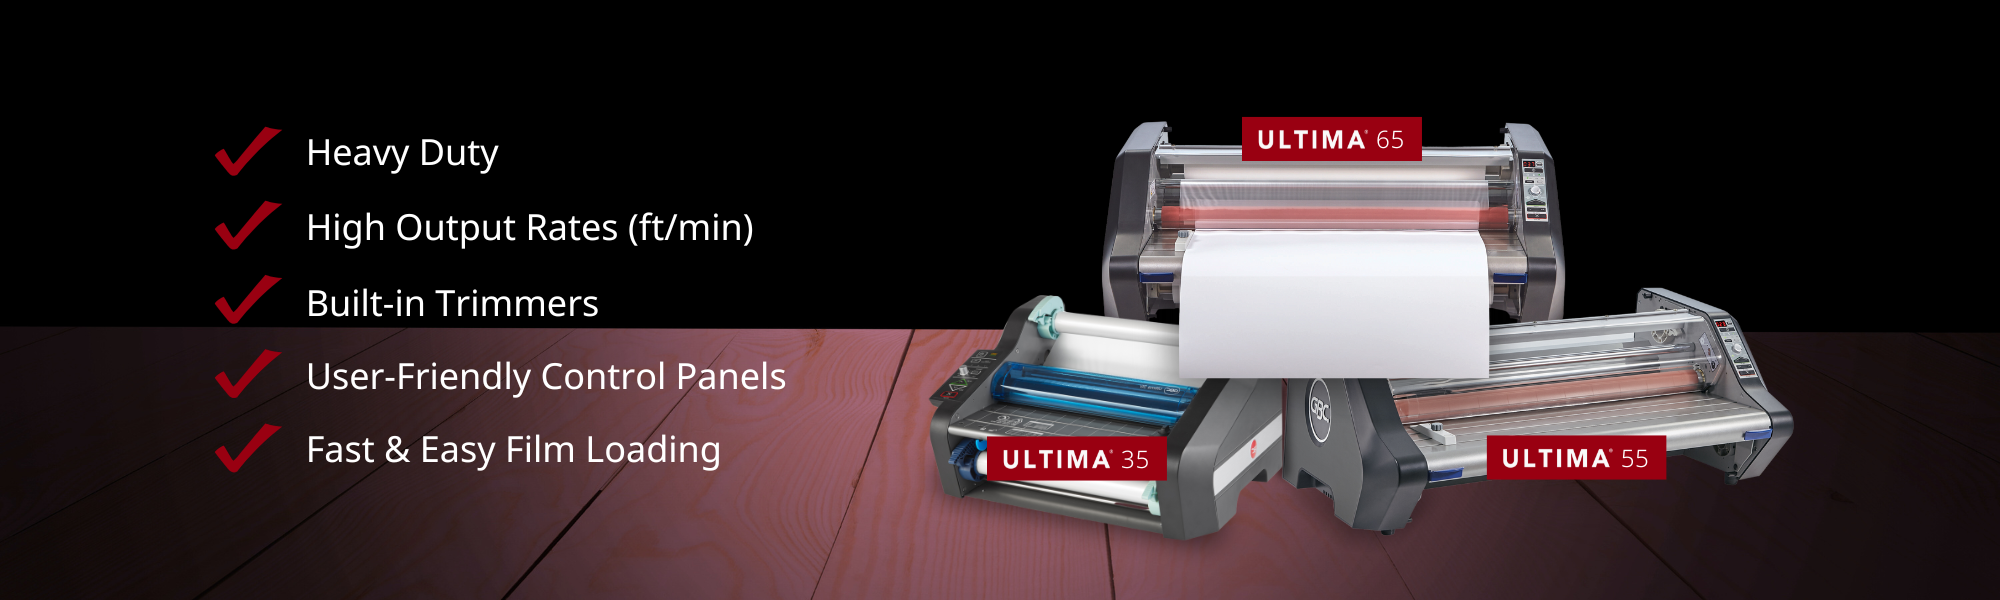 GBC Ultima Laminators: The Optimal Choice for Your Project